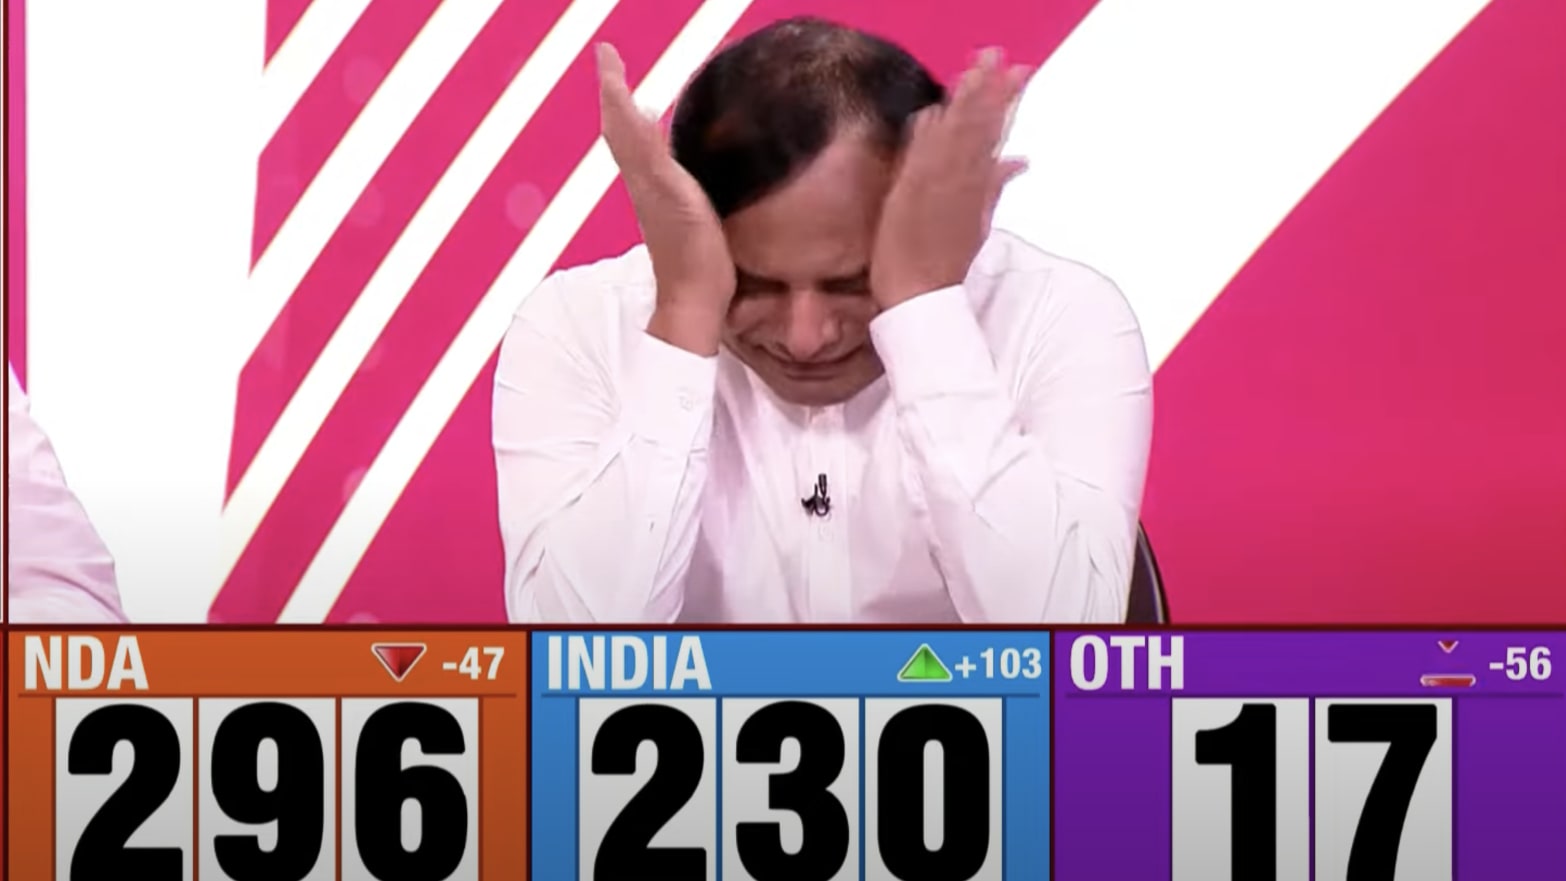 Pollster Pradeep Gupta weeps on India Today after his exit poll in the Indian election is shown to be inaccurate.